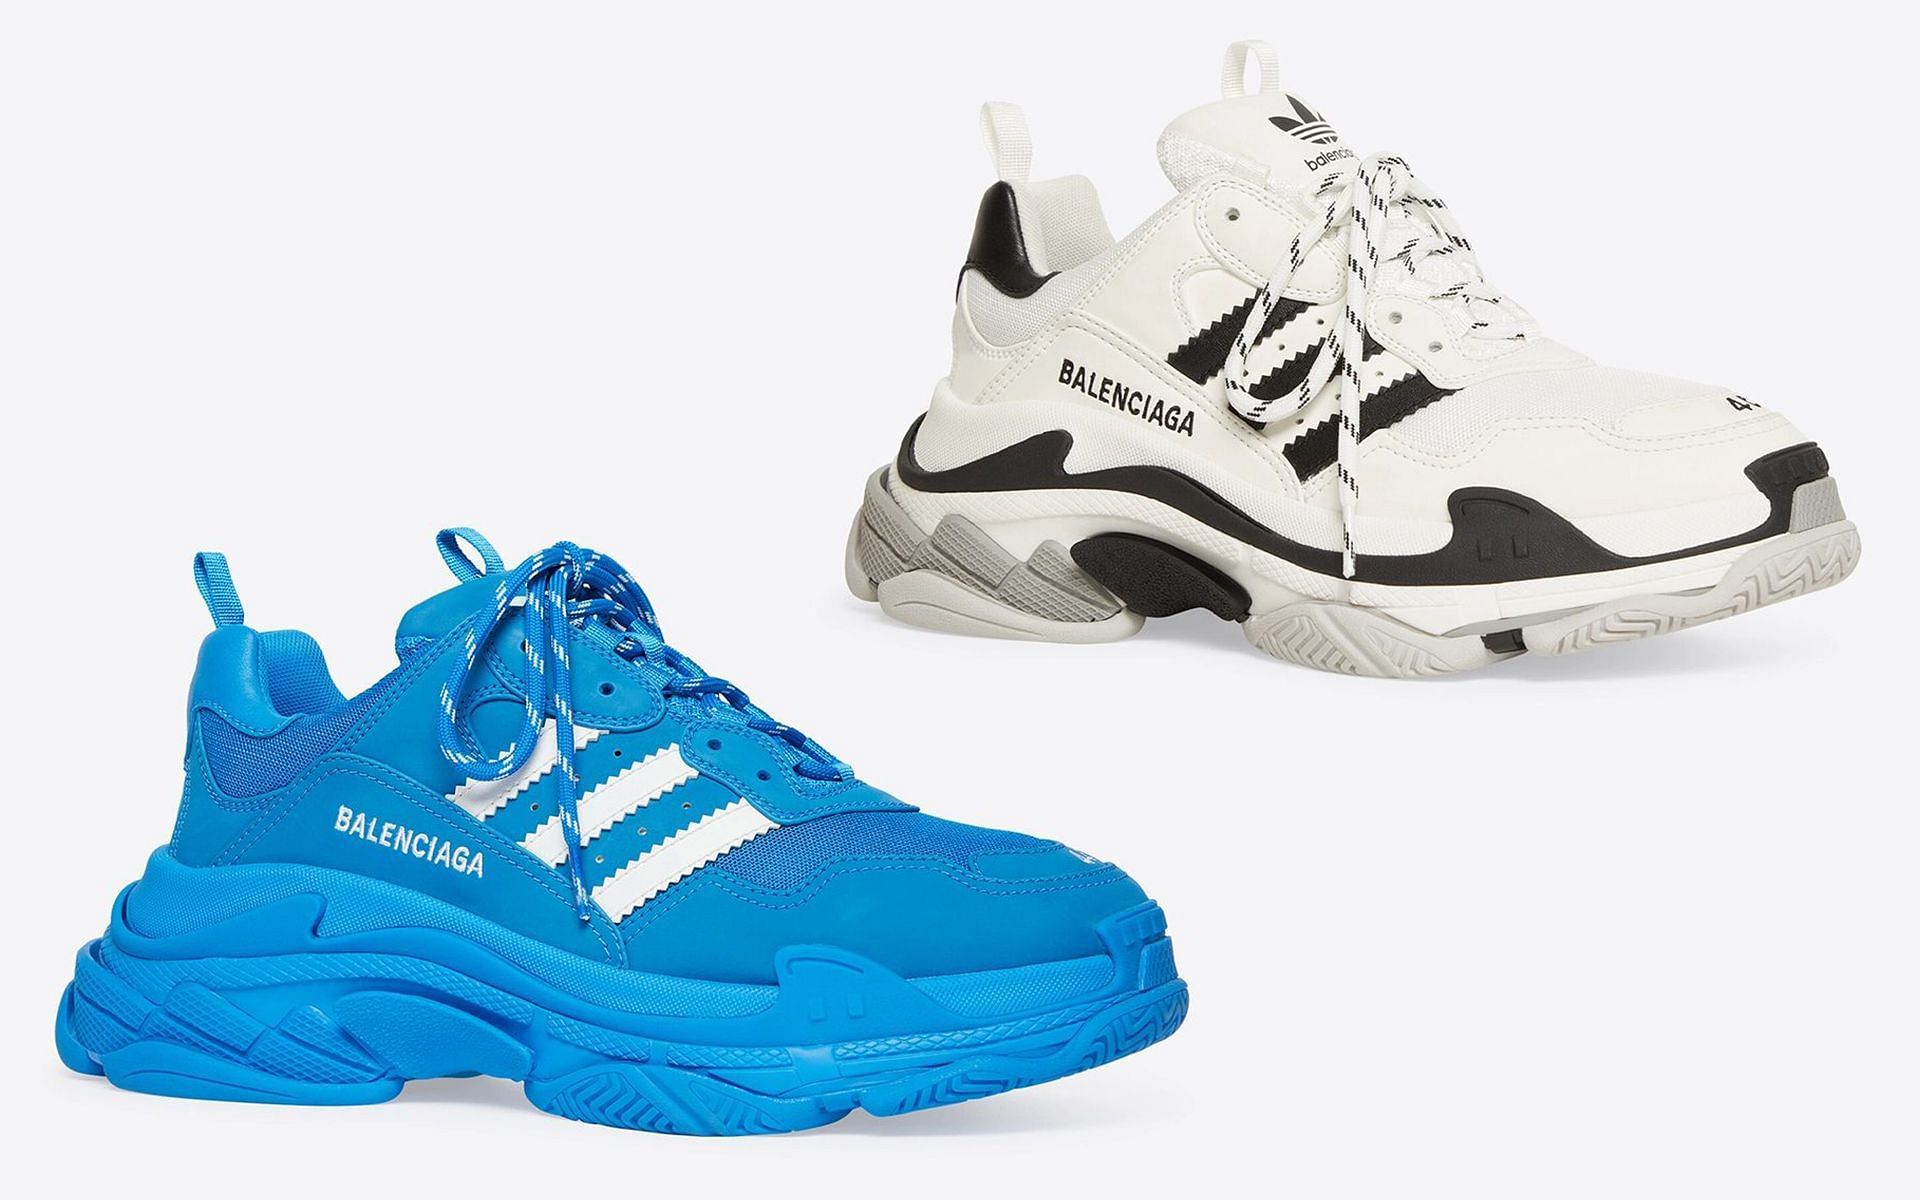 Adidas Balenciaga release new collaboration after dropping Kanye West